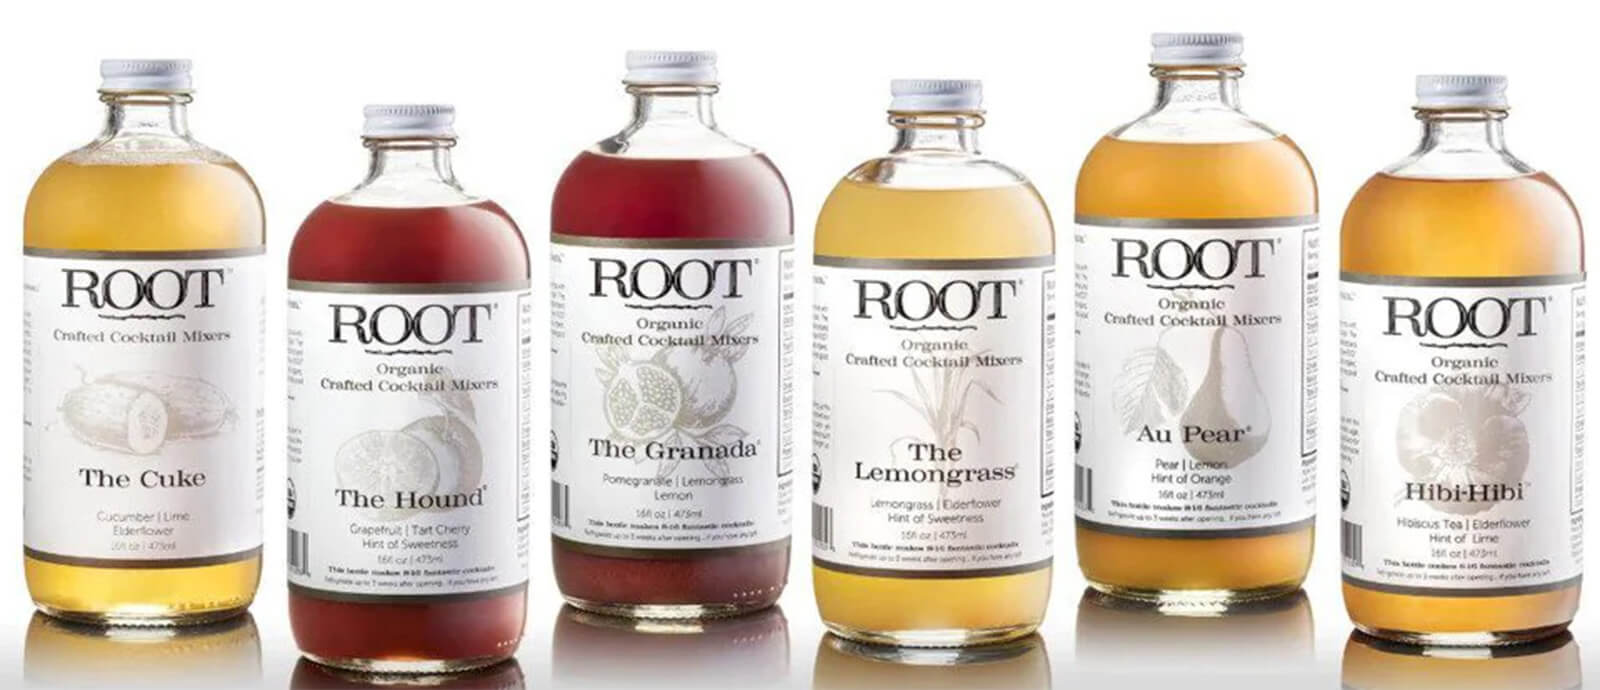 Six glass bottles of Root cocktail mixers of different flavors